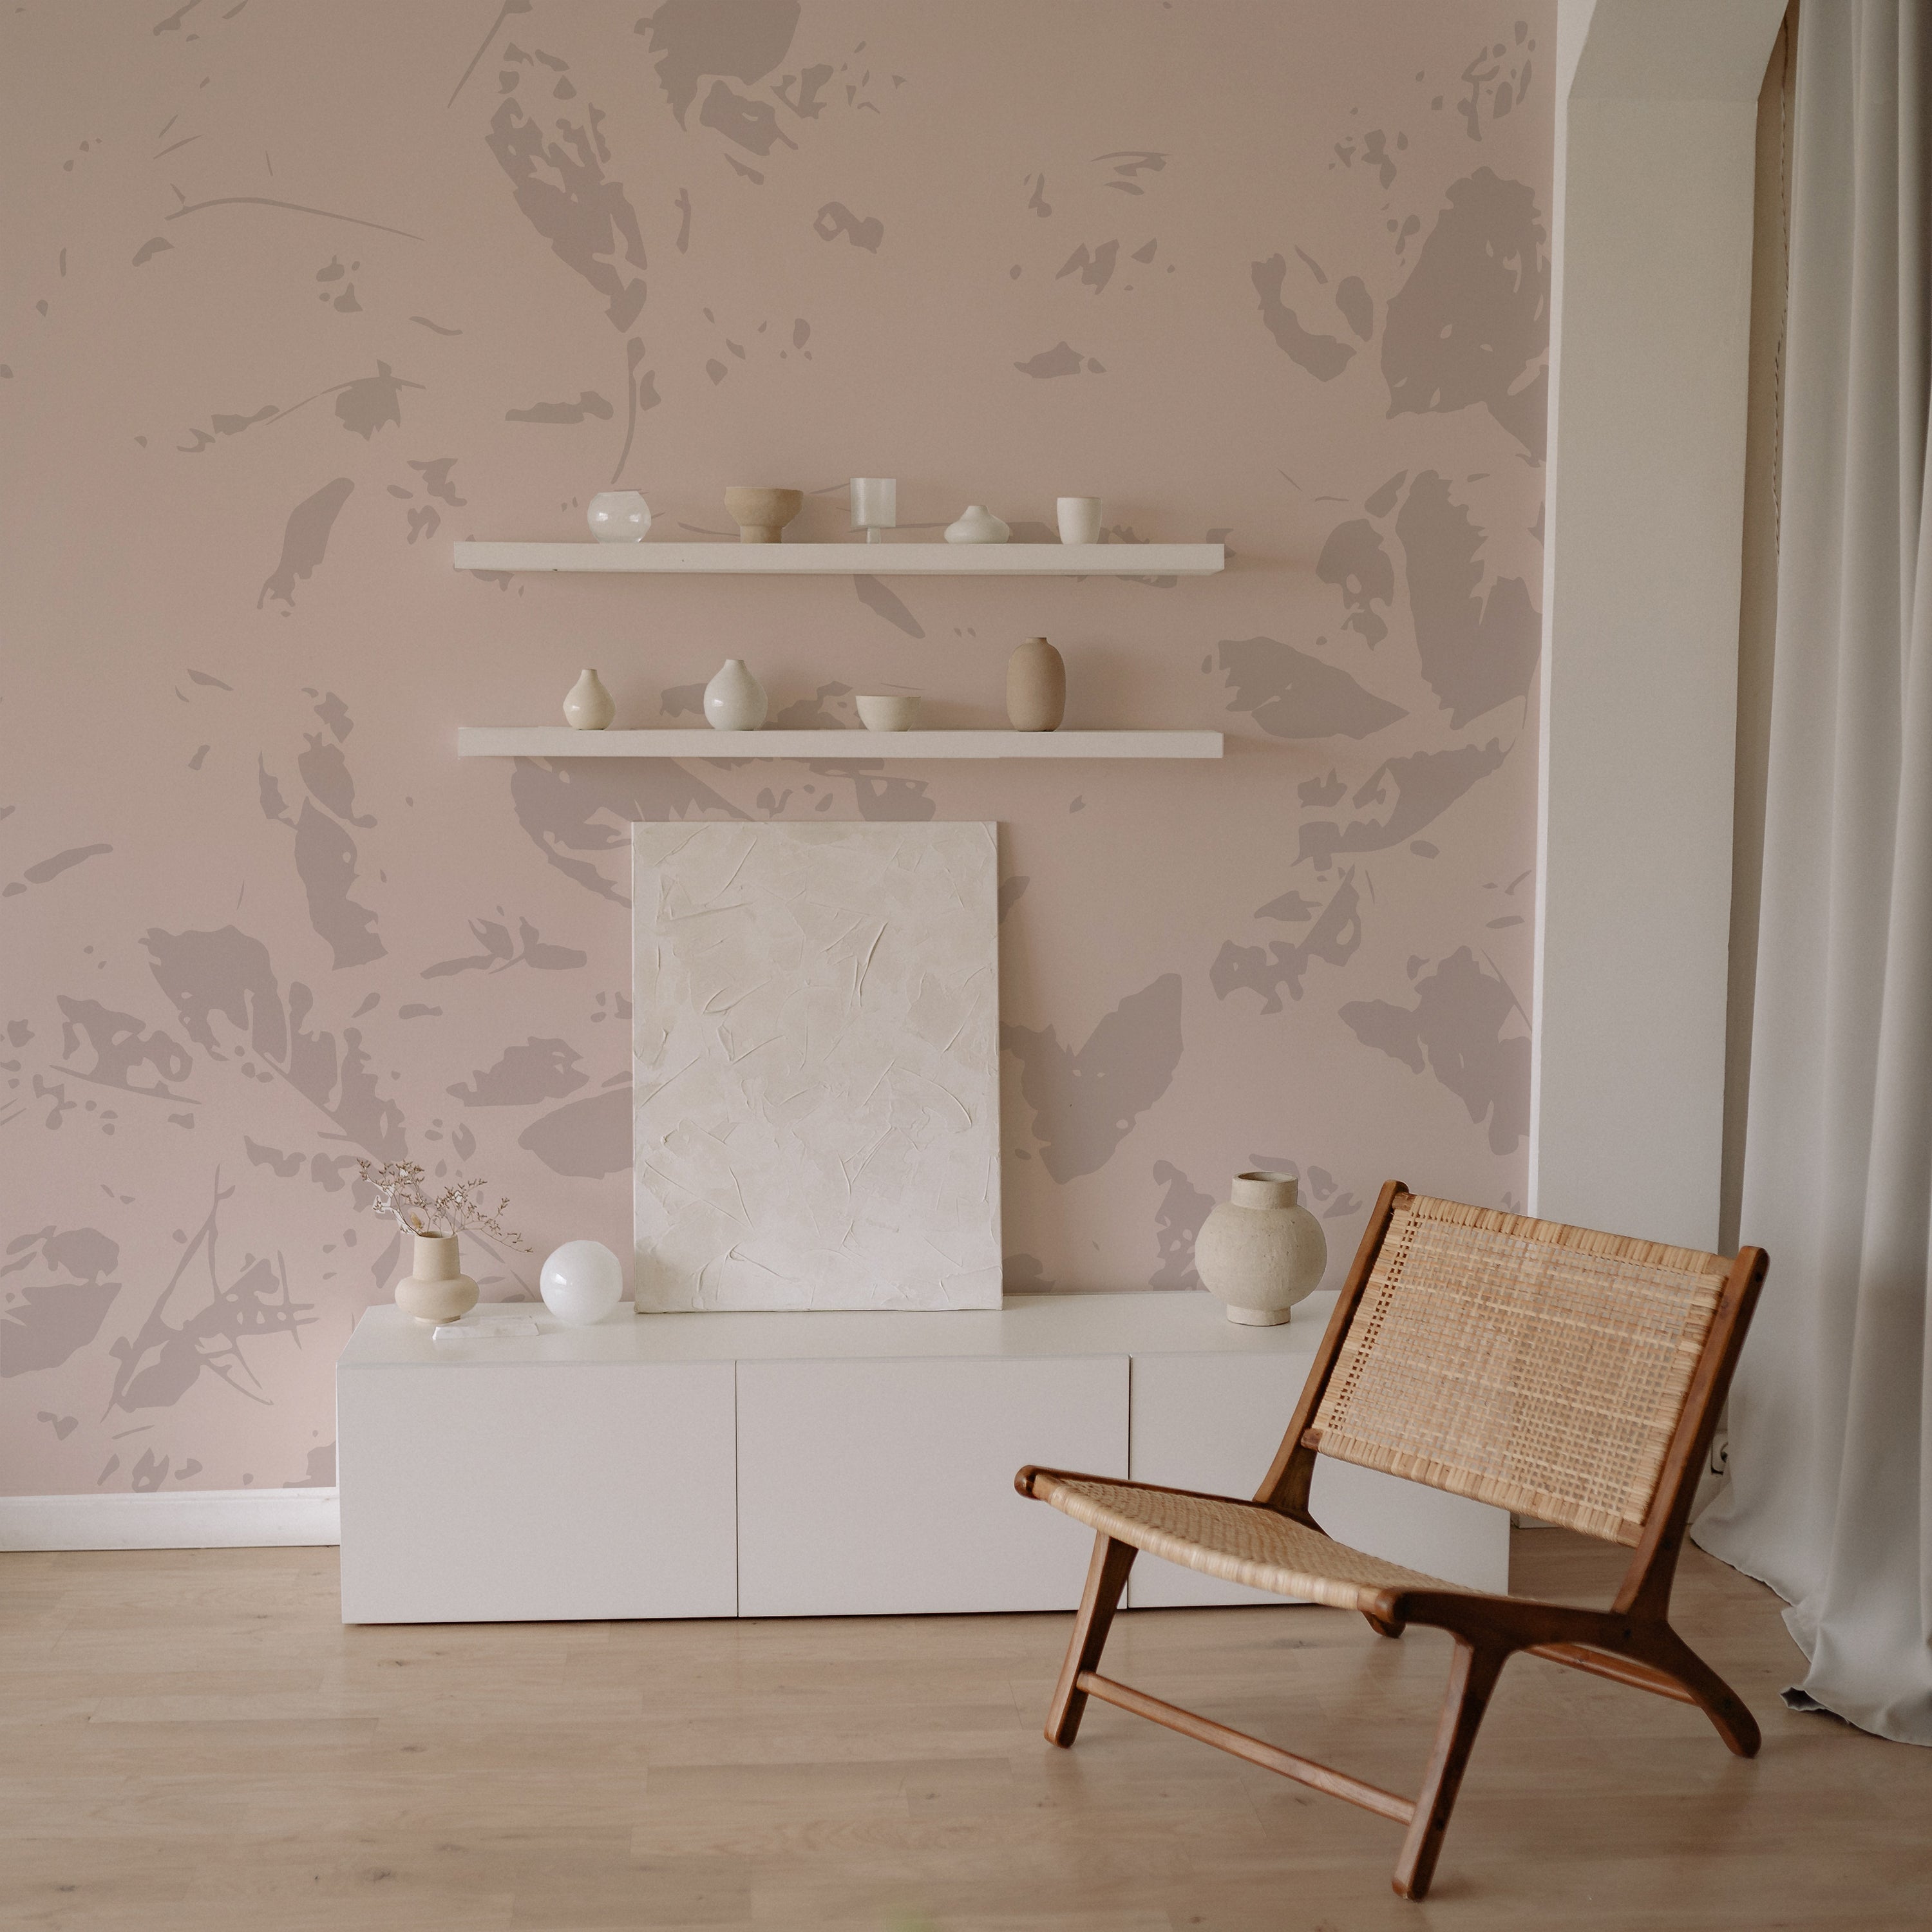 A chic and minimalist room setup showcasing the Abstract Floral - Floral Mural Wallpaper. The wall is adorned with the wallpaper featuring soft gray floral patterns on a blush pink background. The room includes a modern white storage unit, wooden shelves with ceramic decorations, and a stylish wooden armchair, enhancing the elegant and calm feel of the space.